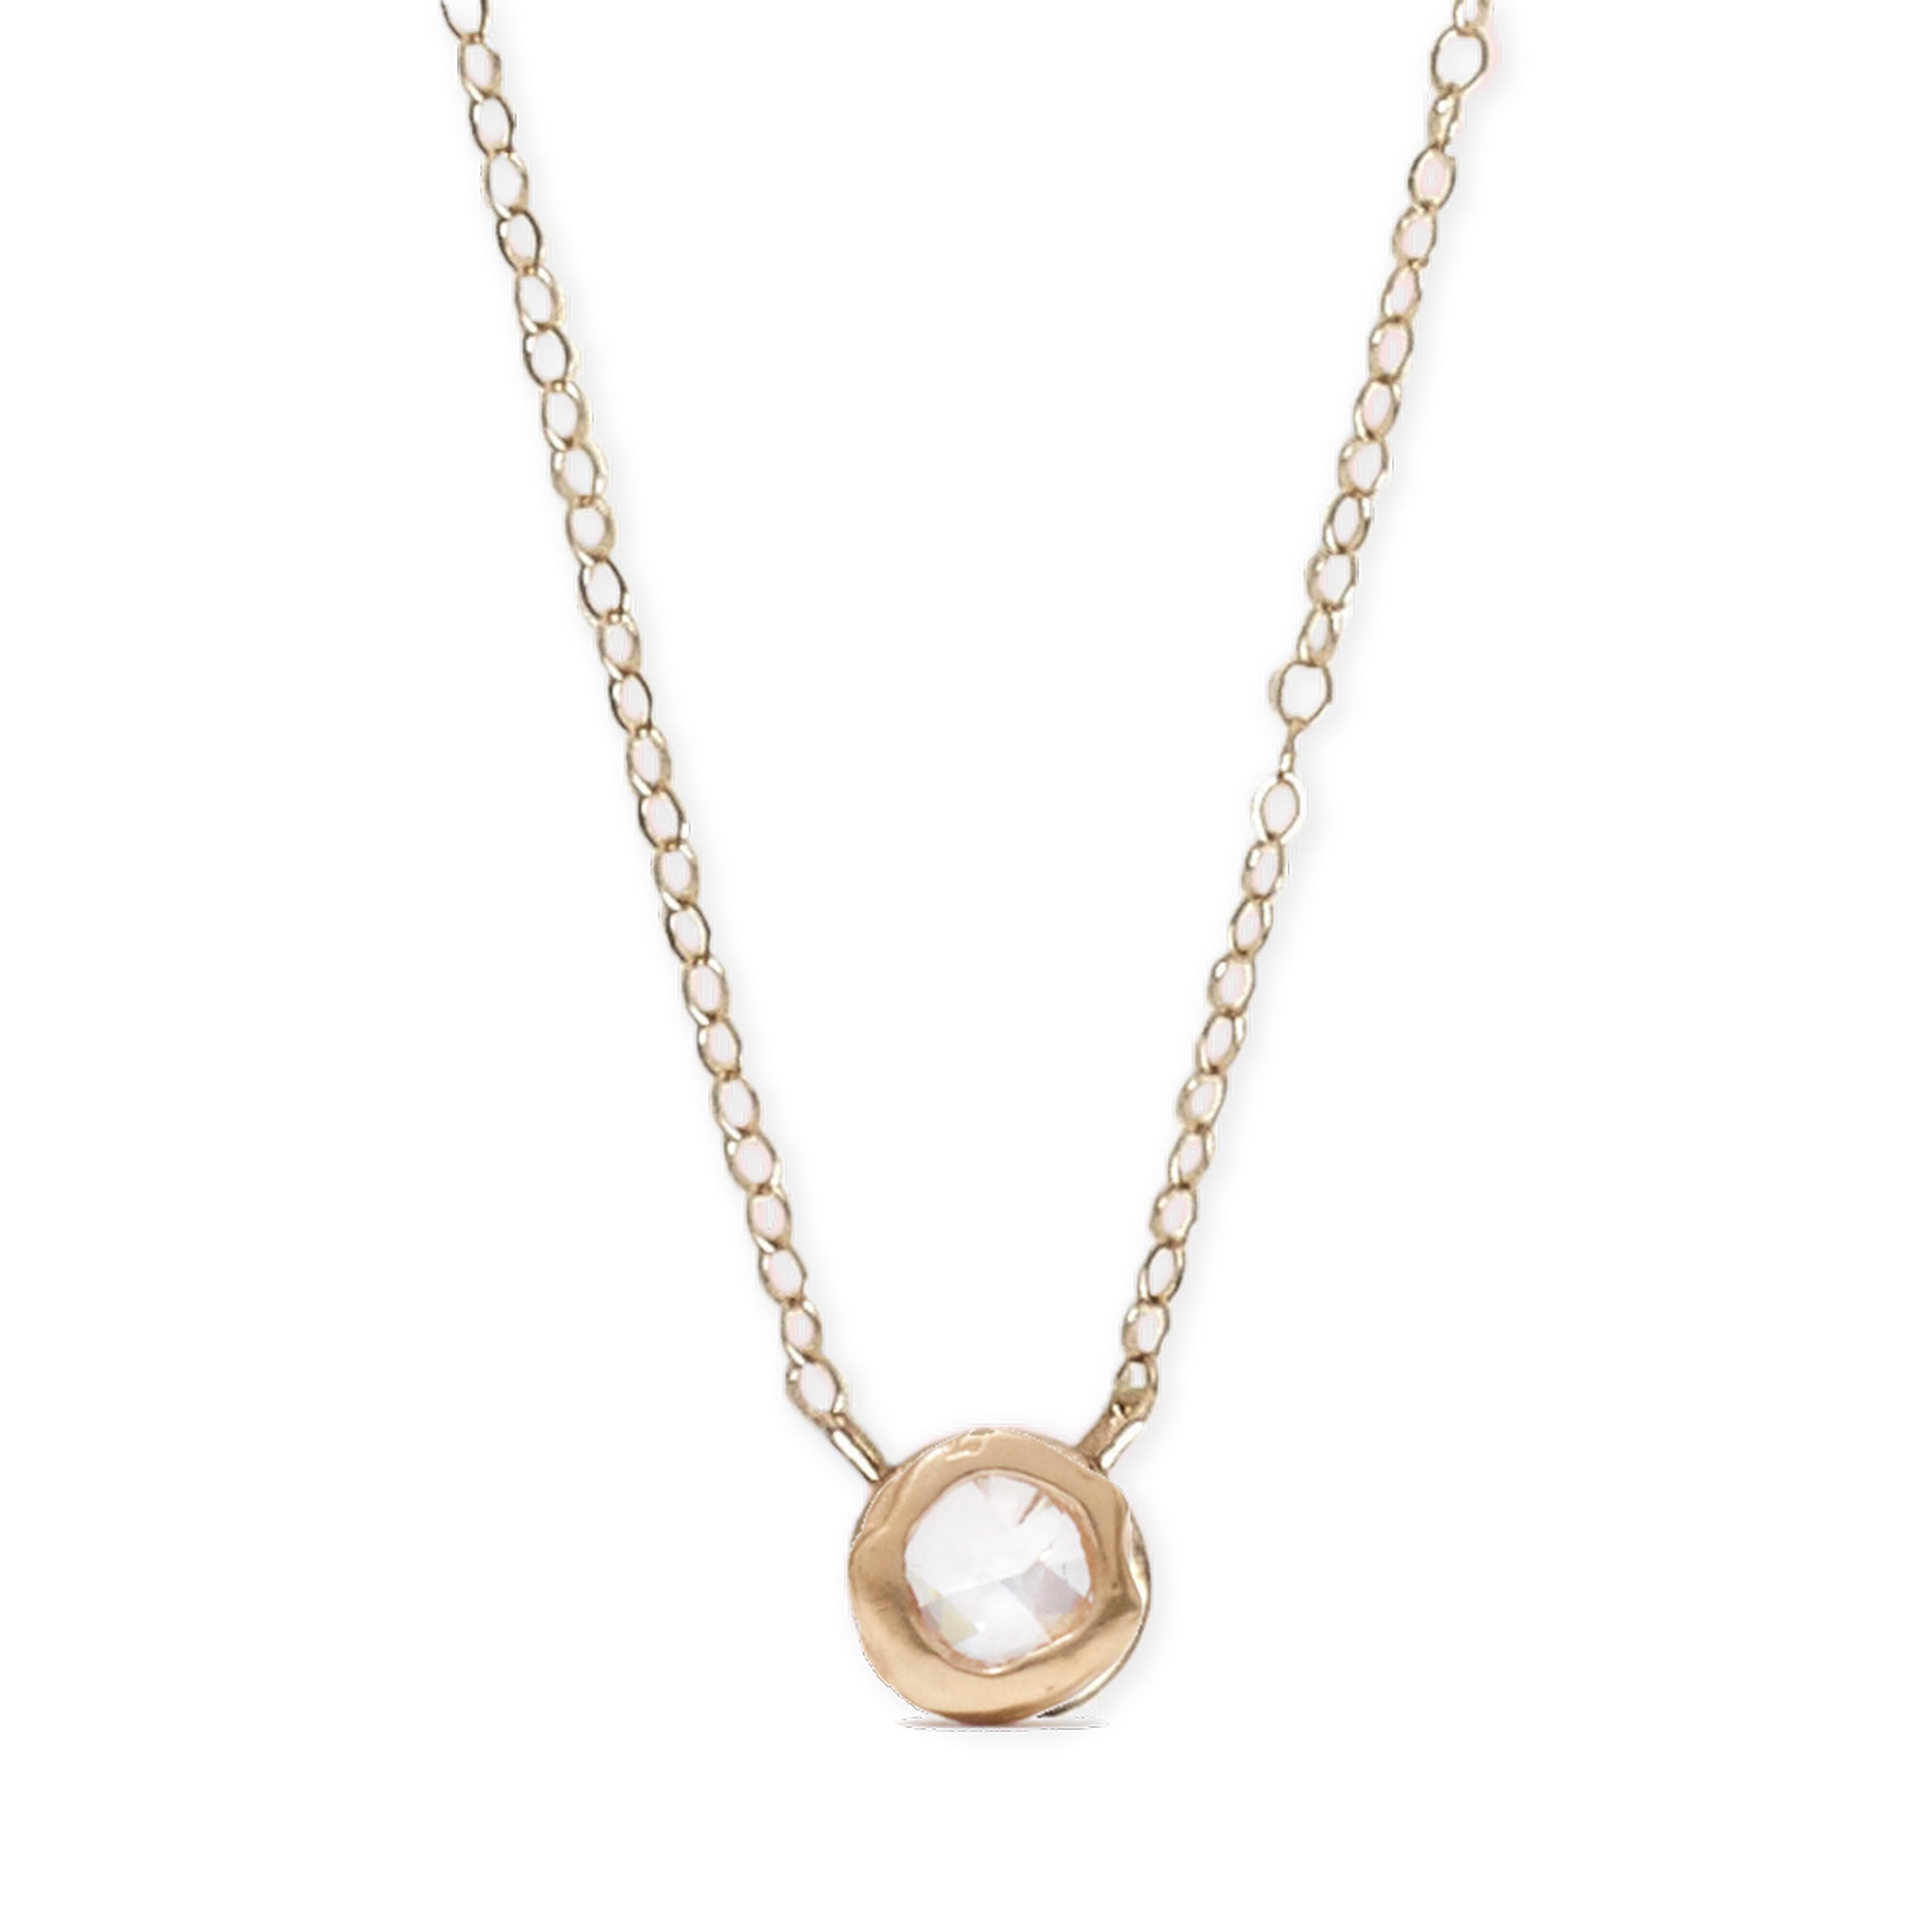 The Atol Diamond Necklace is simple and stunning, featuring a 3.4mm rose cut diamond flush set in a 14k gold pendant.